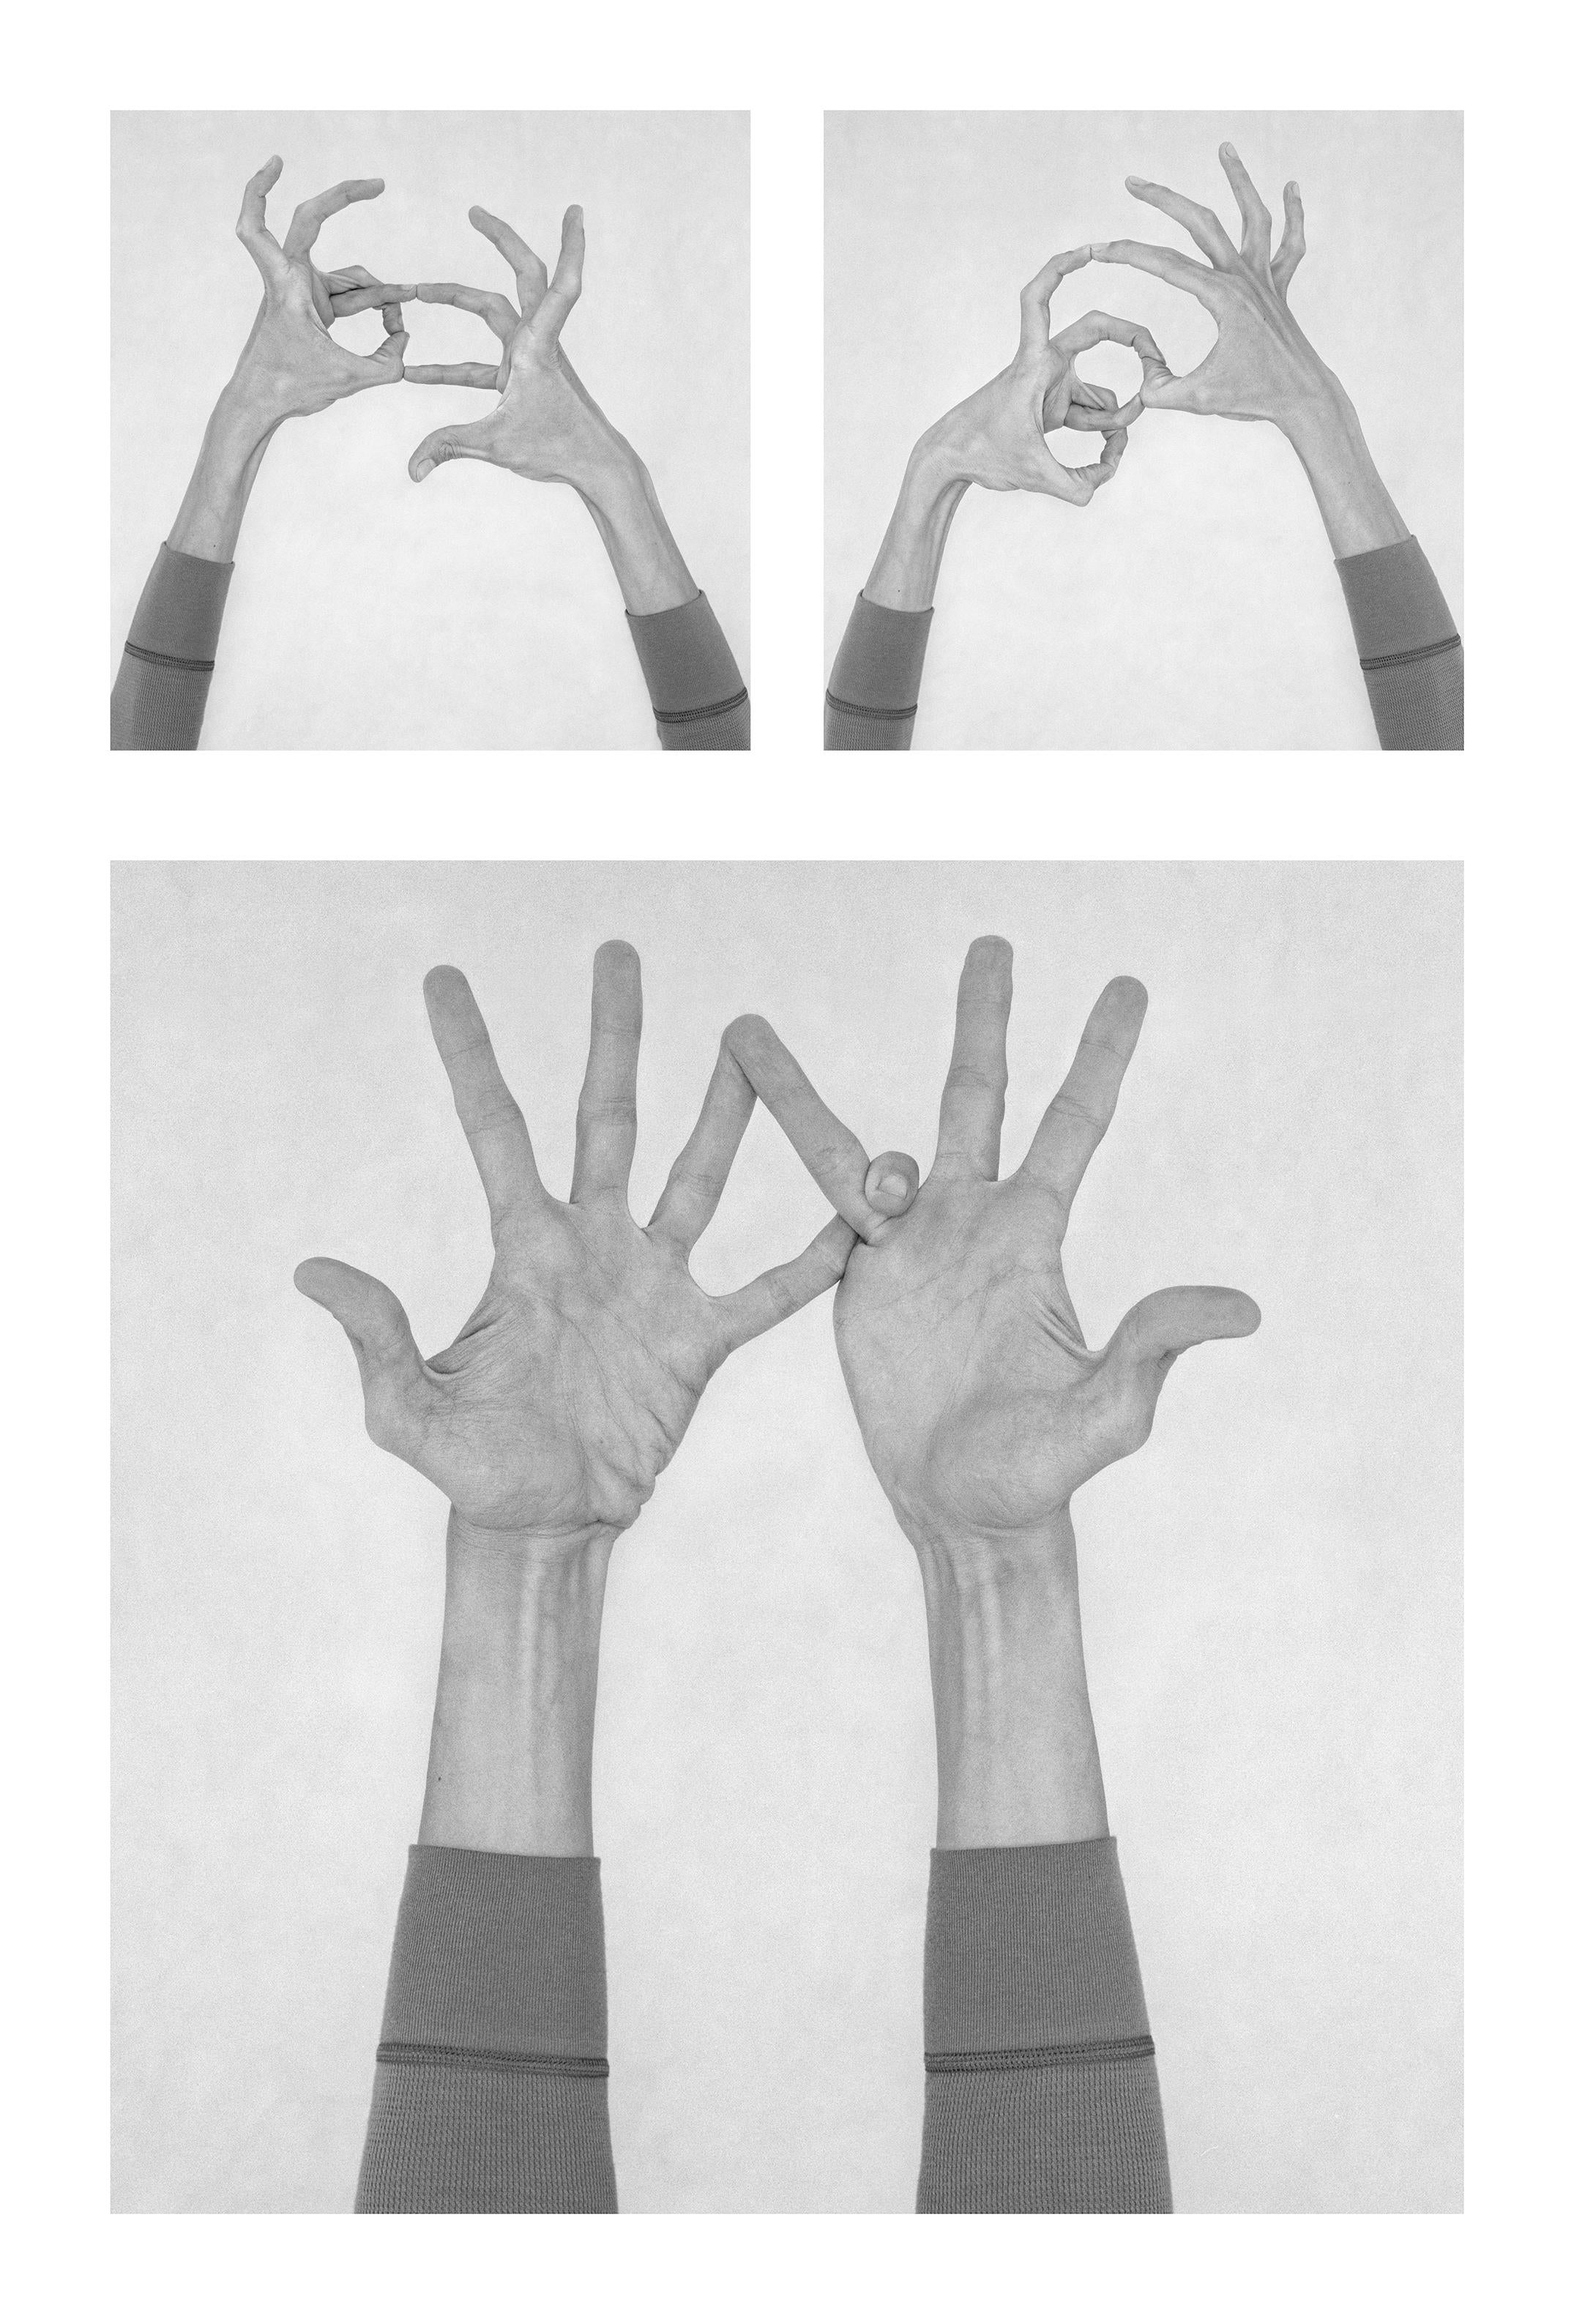 Nico Baixas / Gos-com-fuig Black and White Photograph - Untitled I, Untitled XI, and Untitled II, Hands. From the Series Chiromorphose